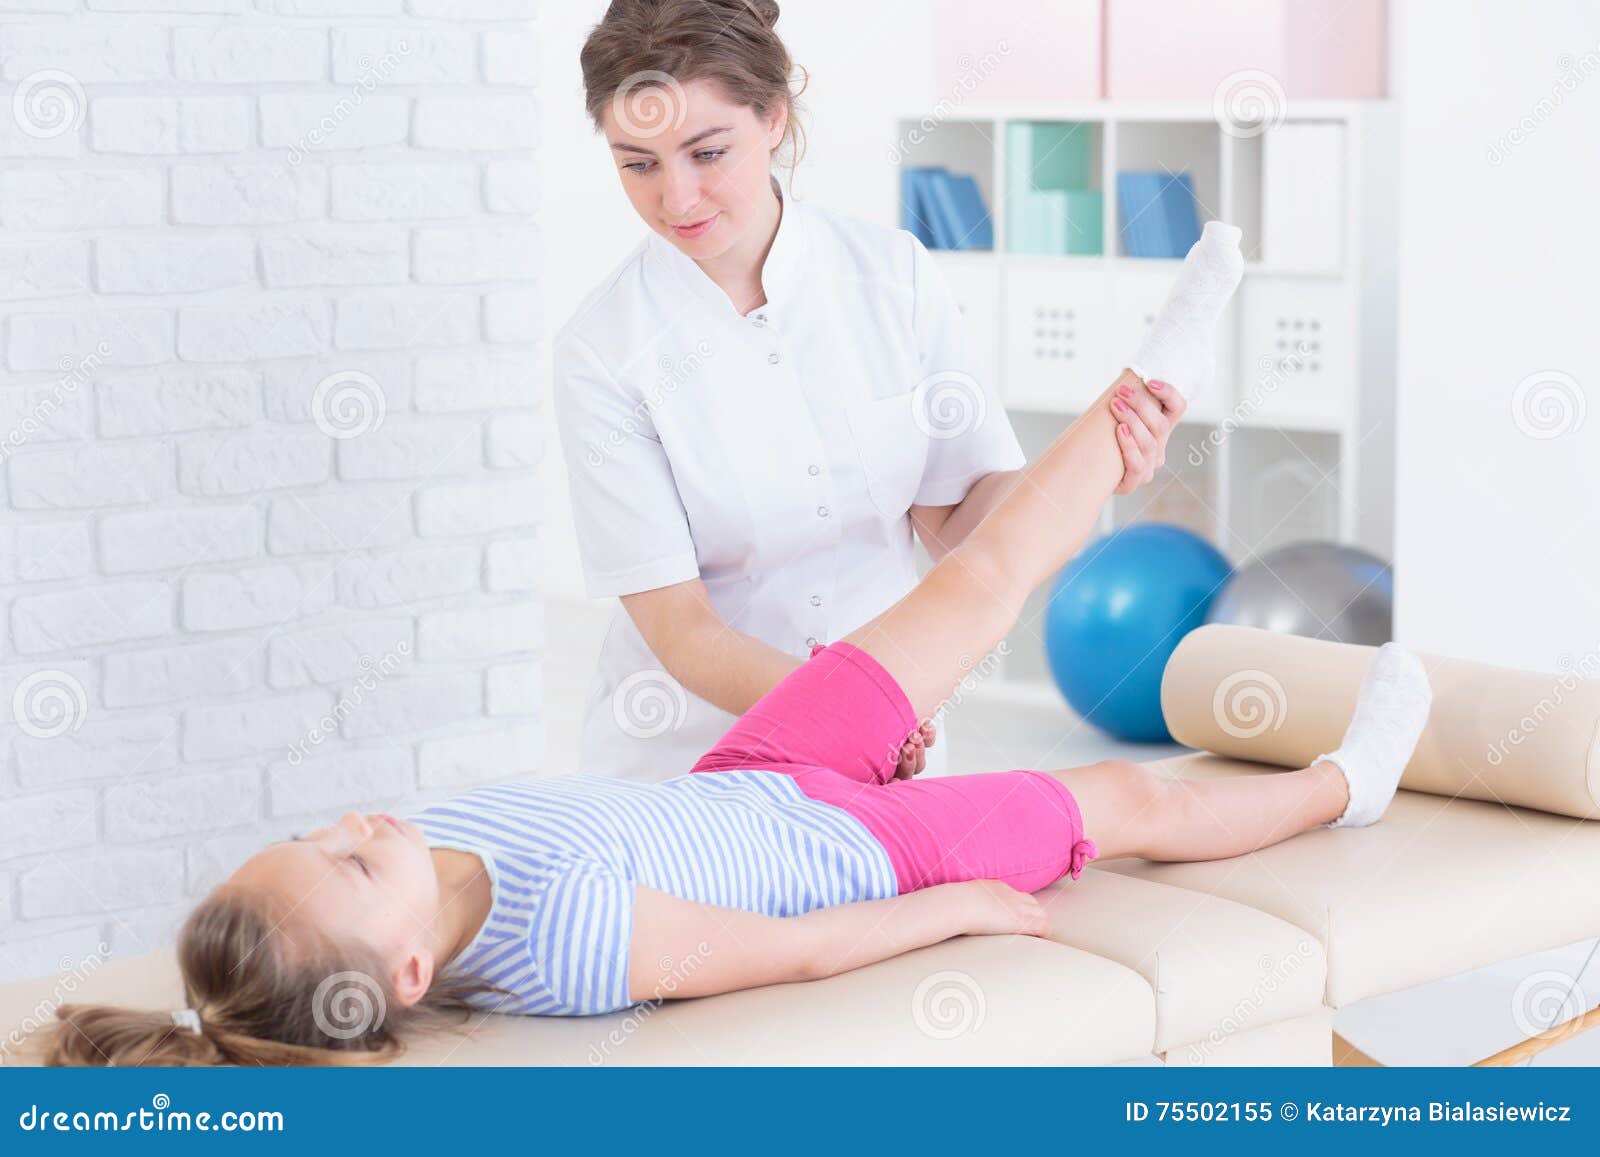 physical therapy with child